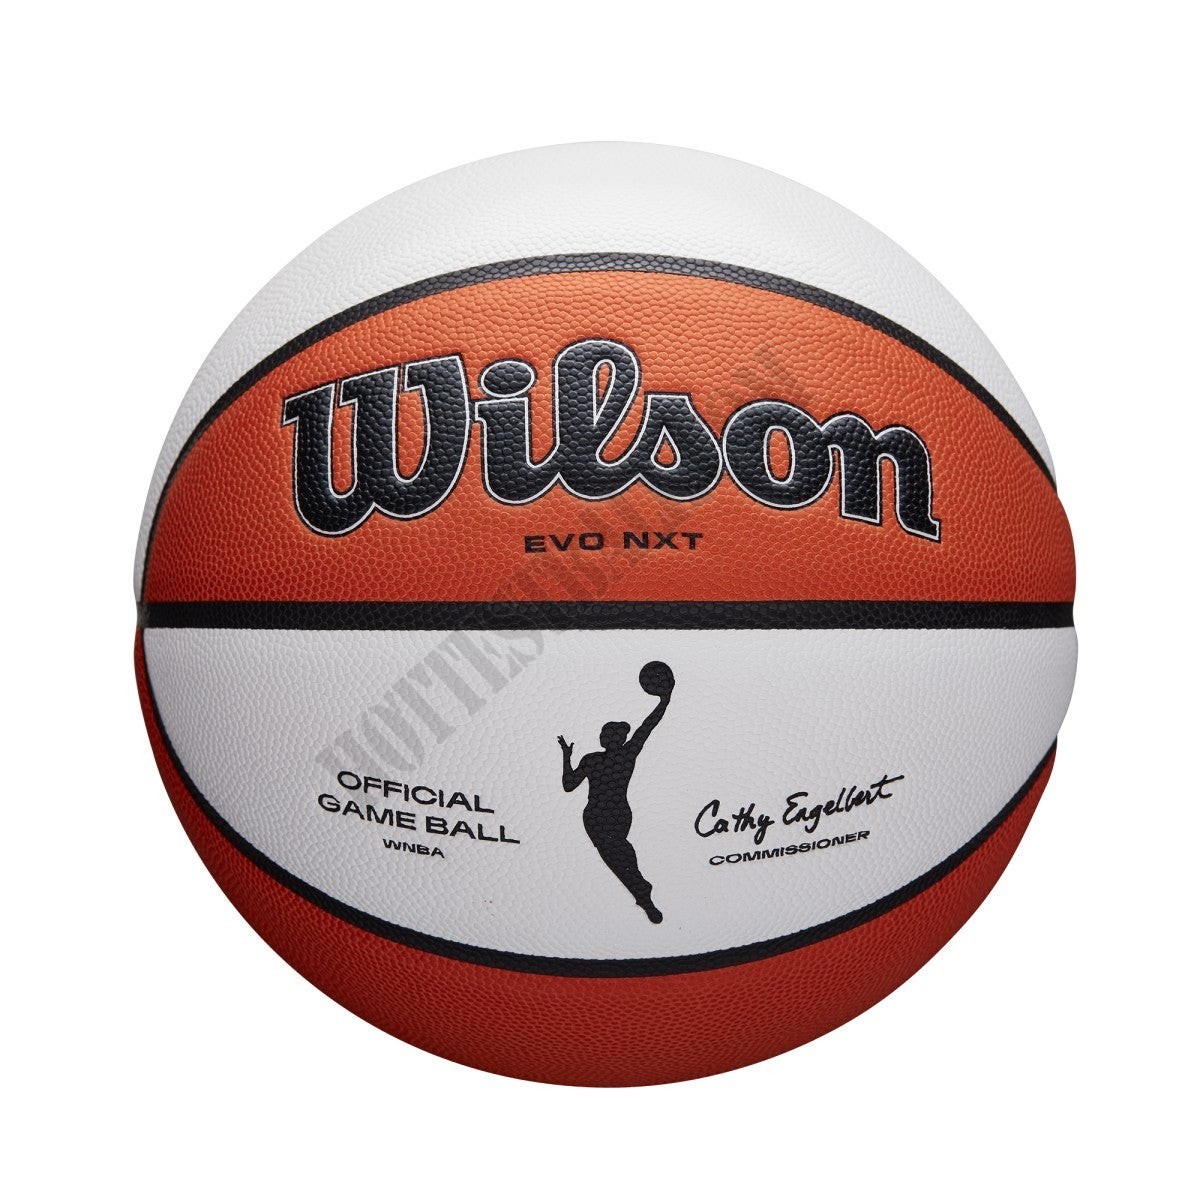 WNBA Official Game Basketball - Wilson Discount Store - -0